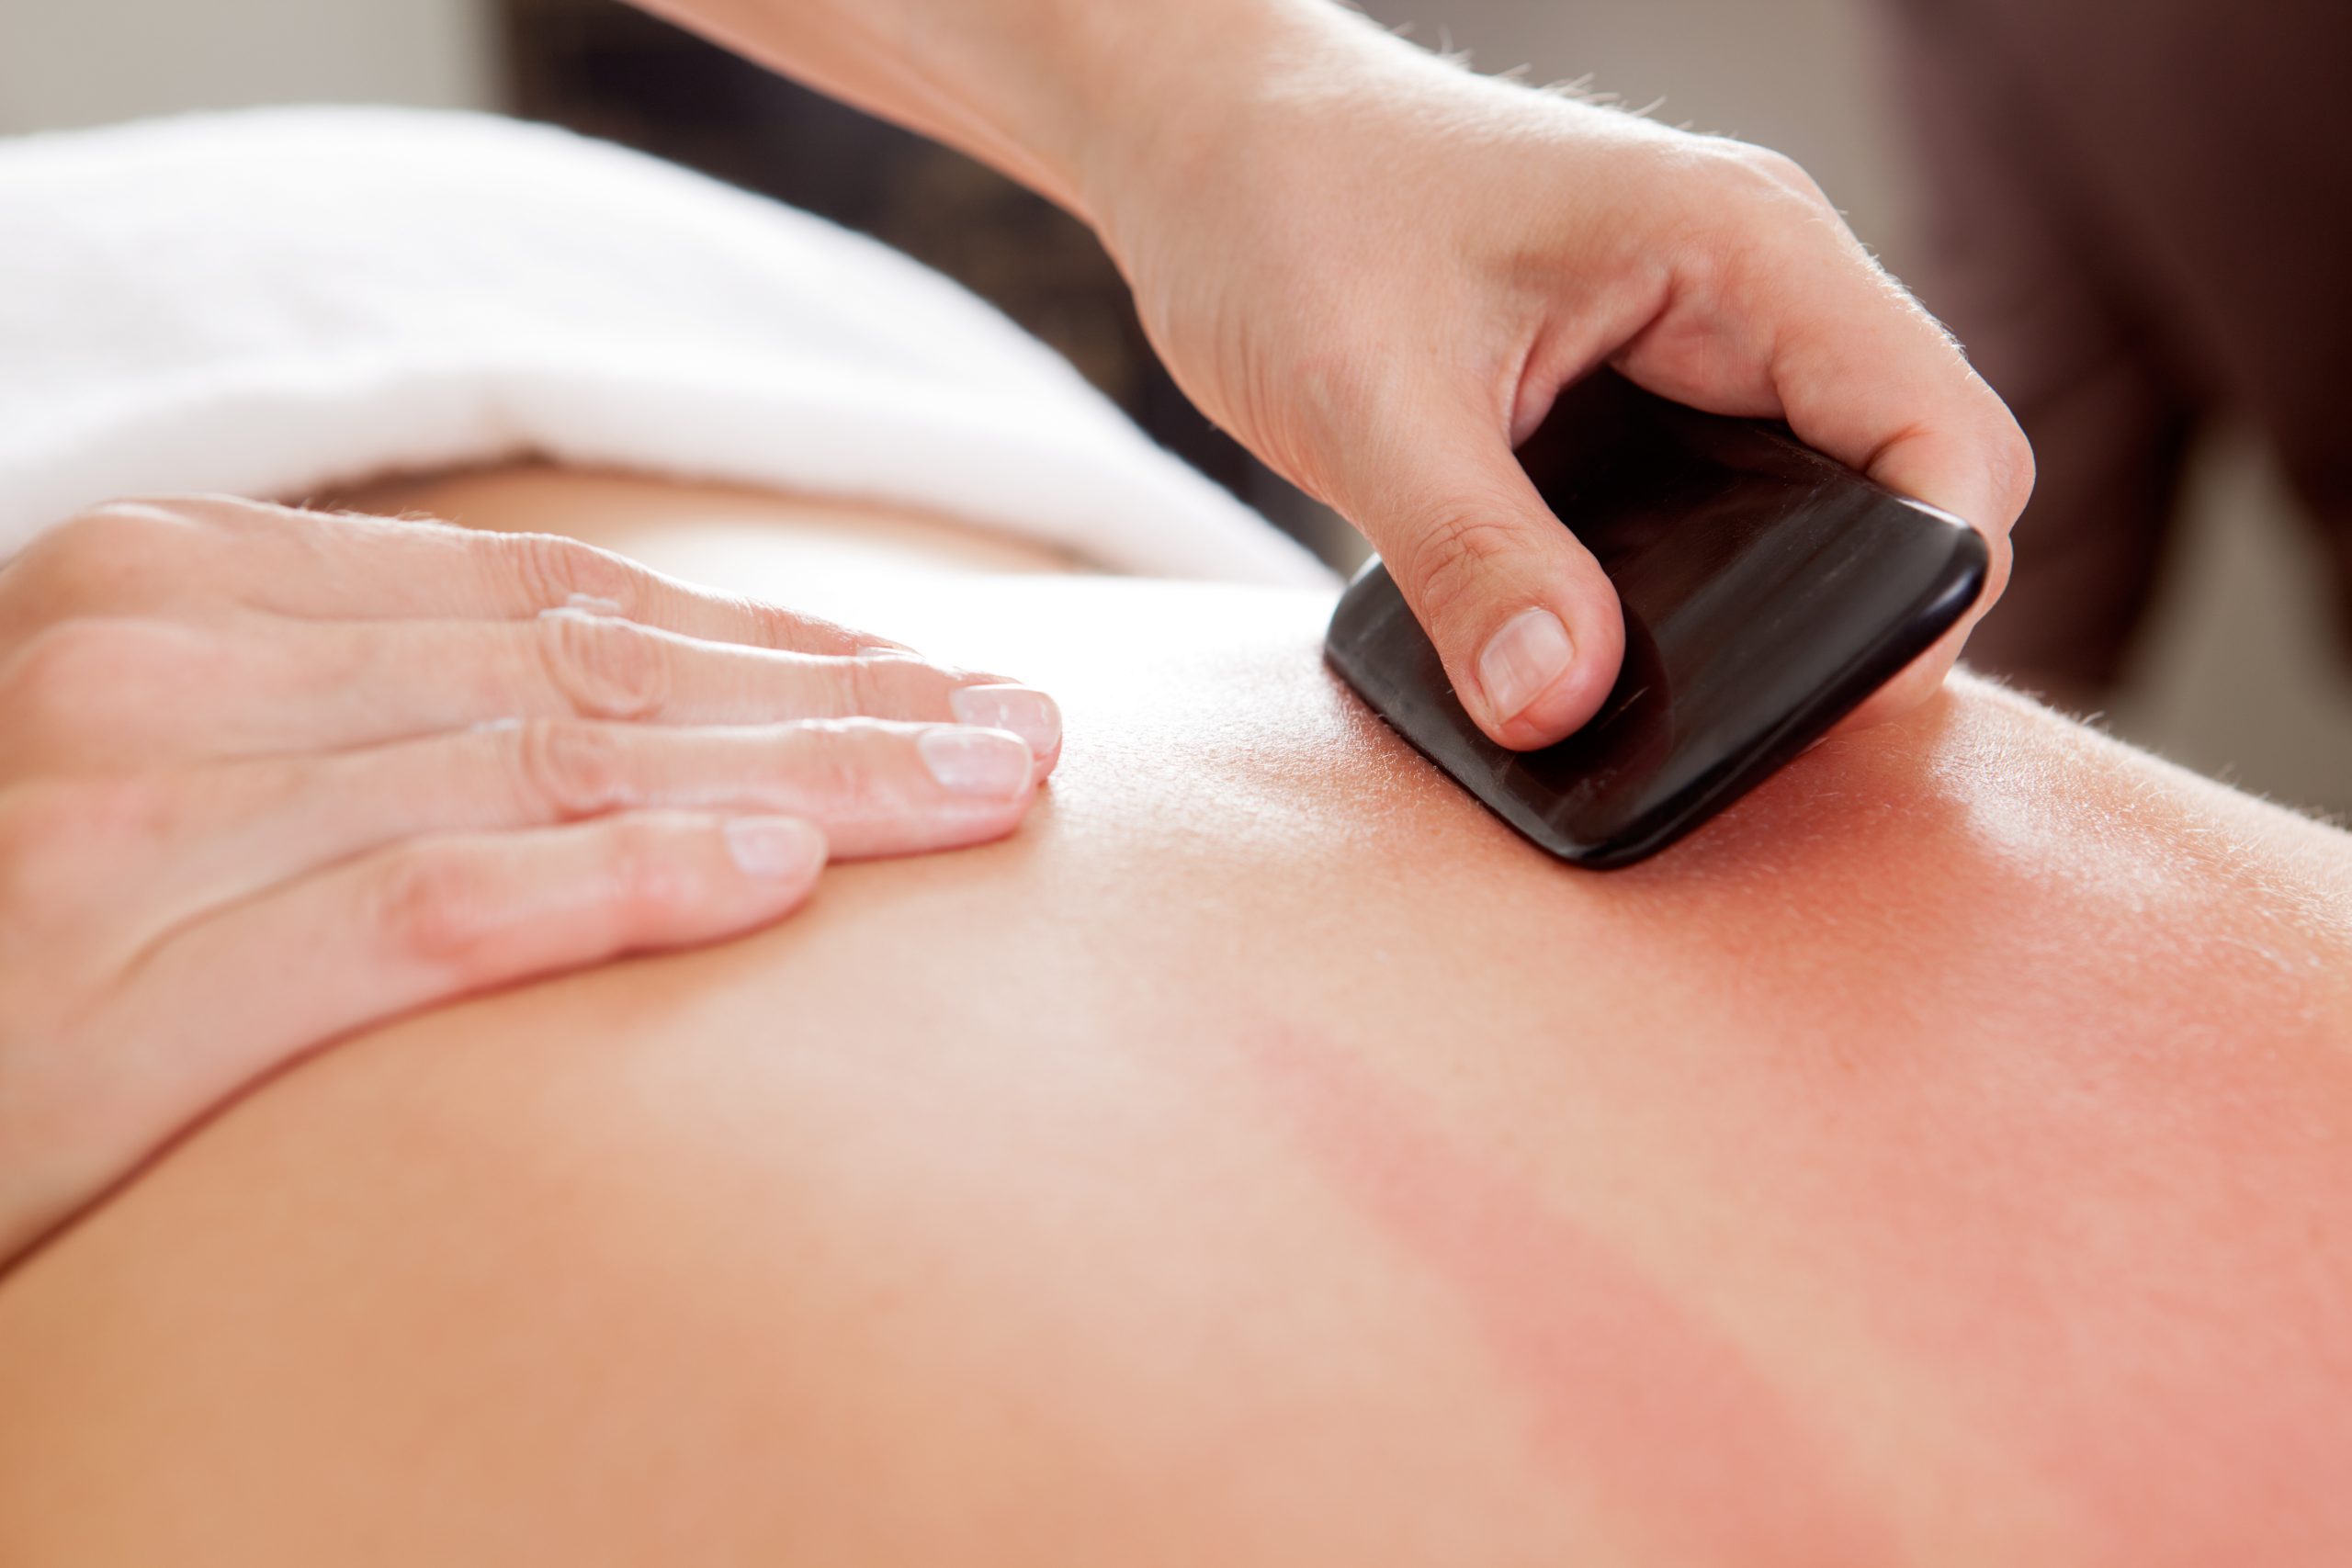 Therapist using a gua sha stone on a client's reddened back for muscle relaxation and pain relief in NE Portland.